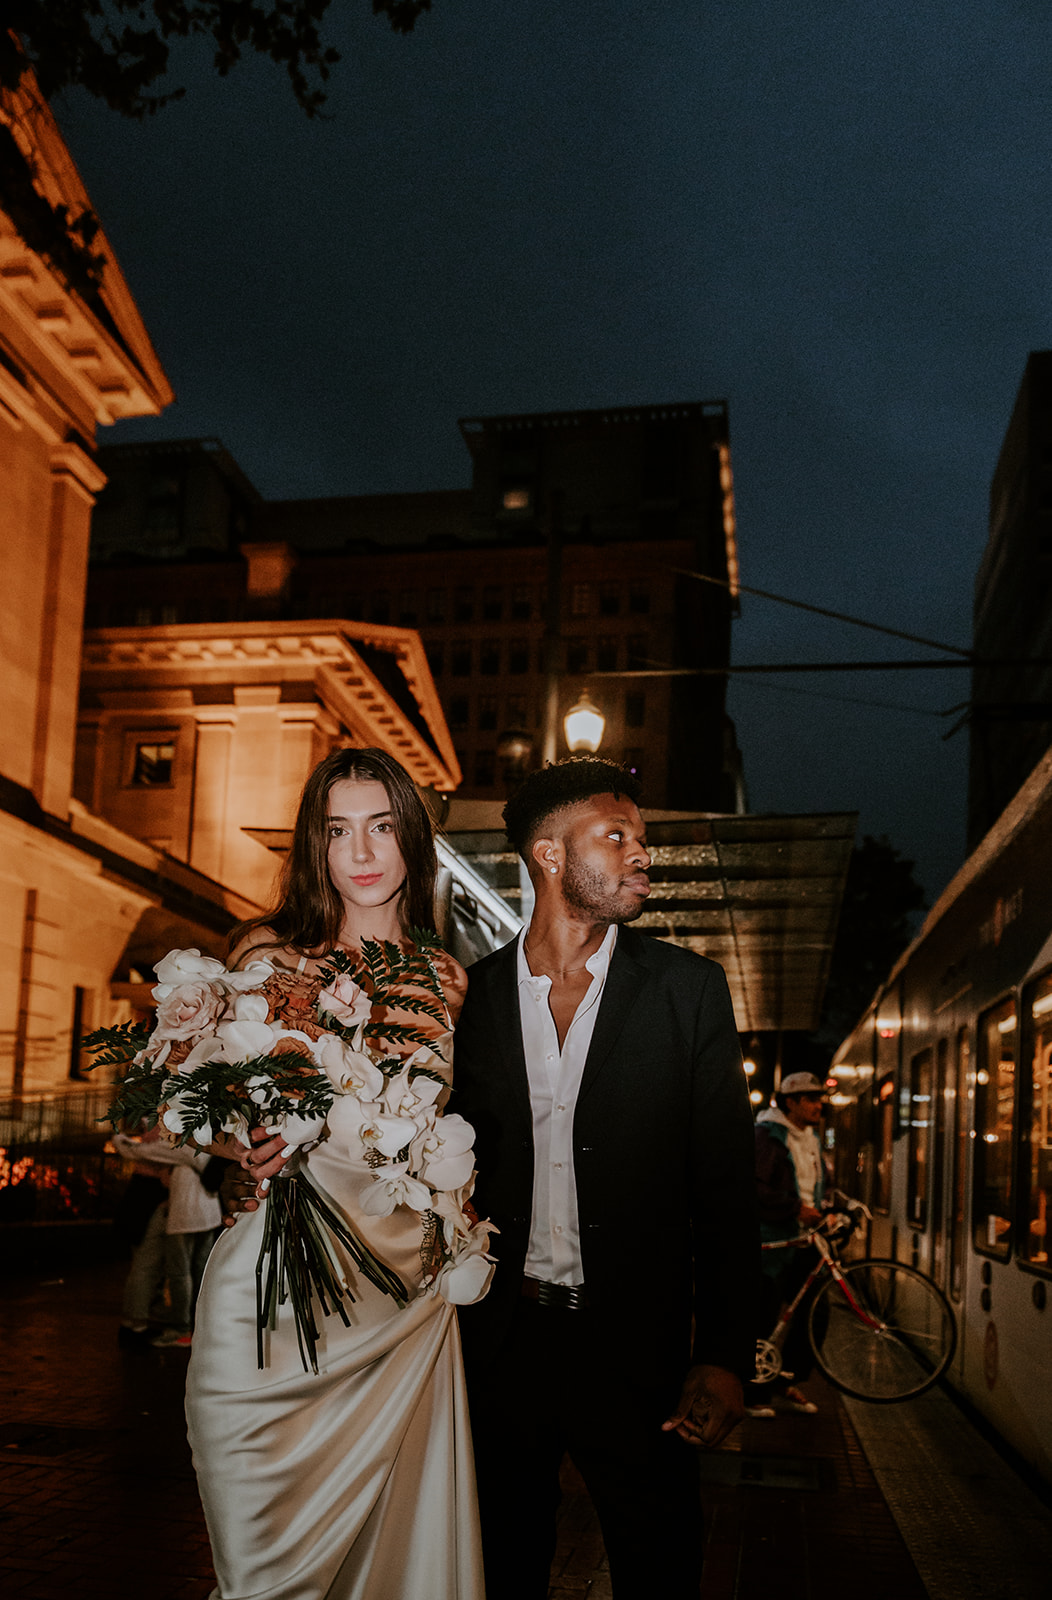 Bride and groom  having flash photos taken at their nighttime elopement in downtown portland